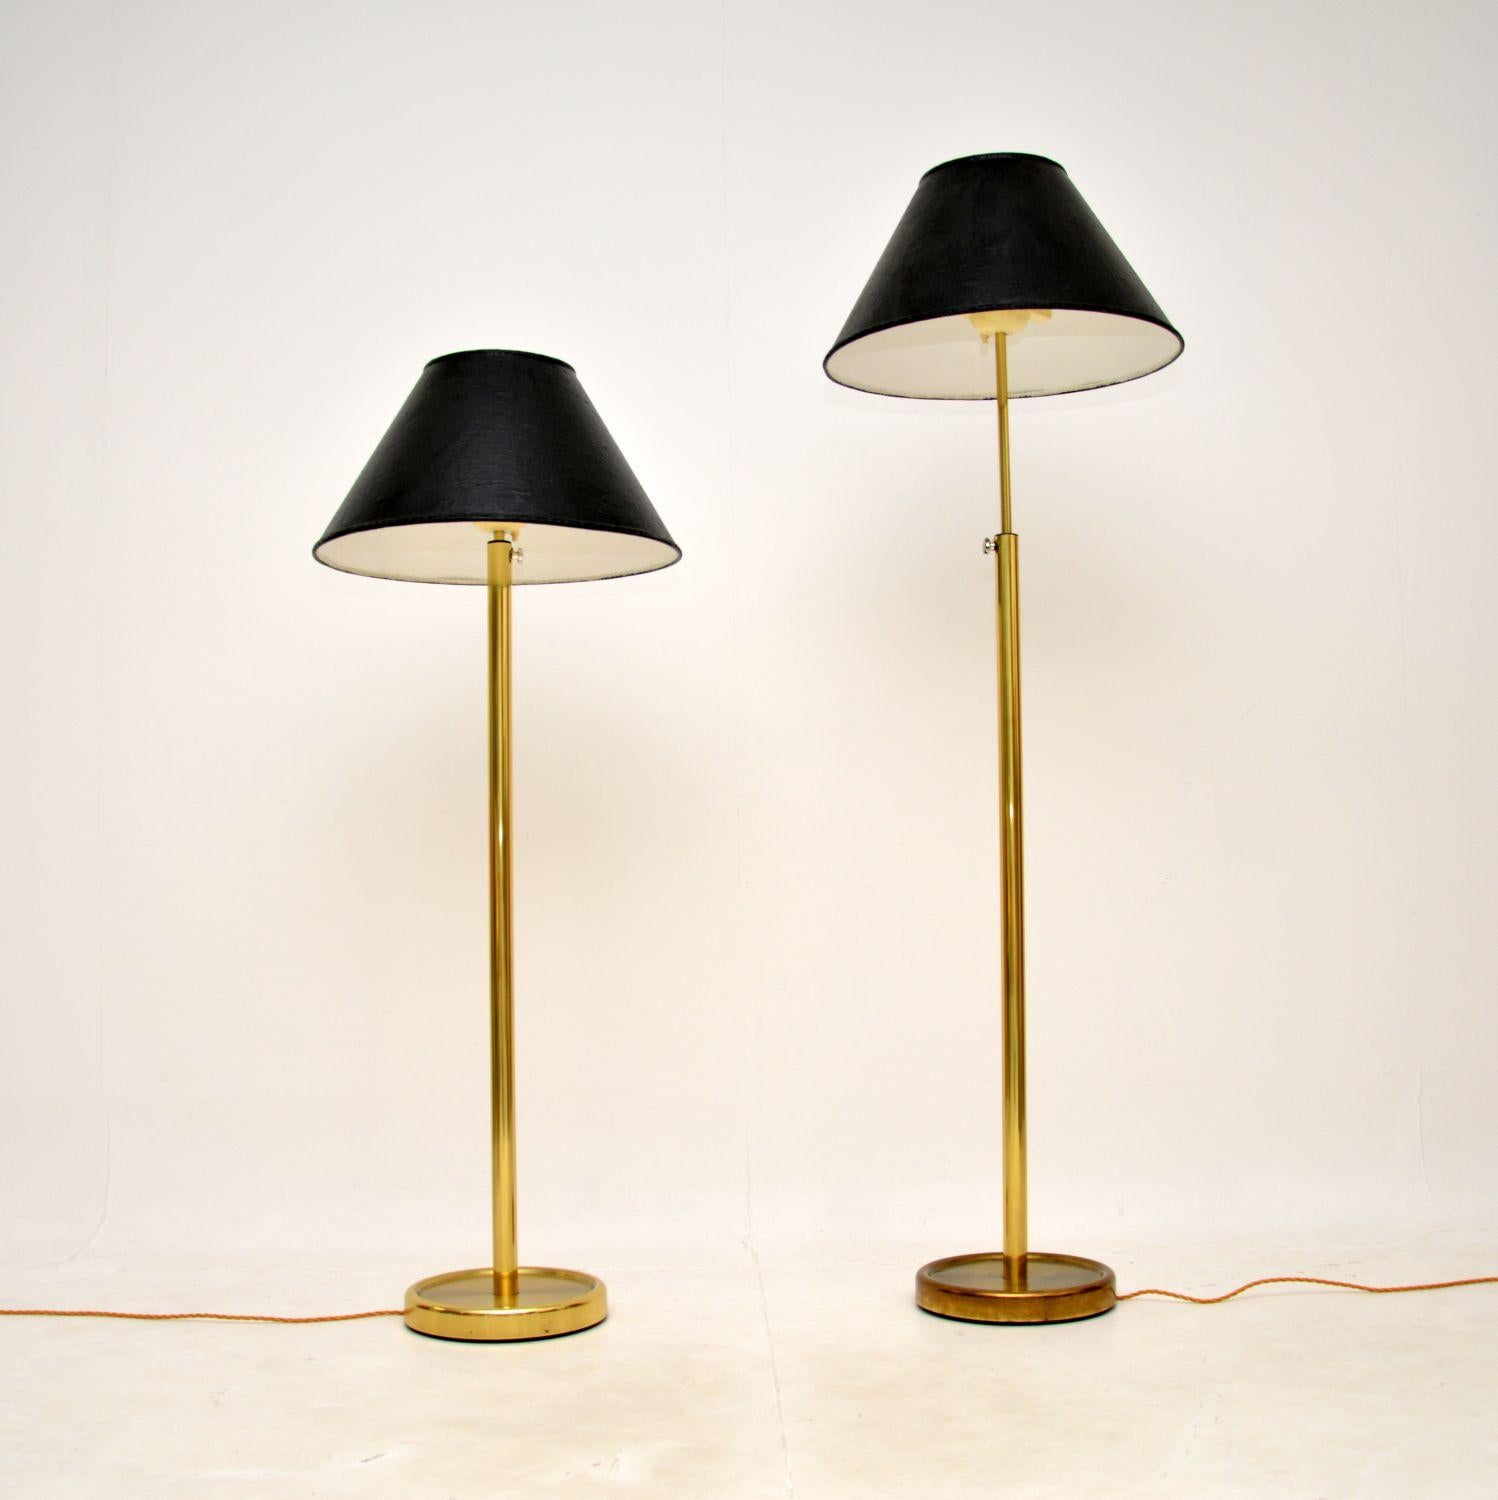 A stylish and very well made pair of vintage Swedish brass rise and fall floor lamps. They were made by Fagerhult in the 1970-80’s and were recently imported from Sweden.

The quality is fantastic and the condition is excellent for their age. Both